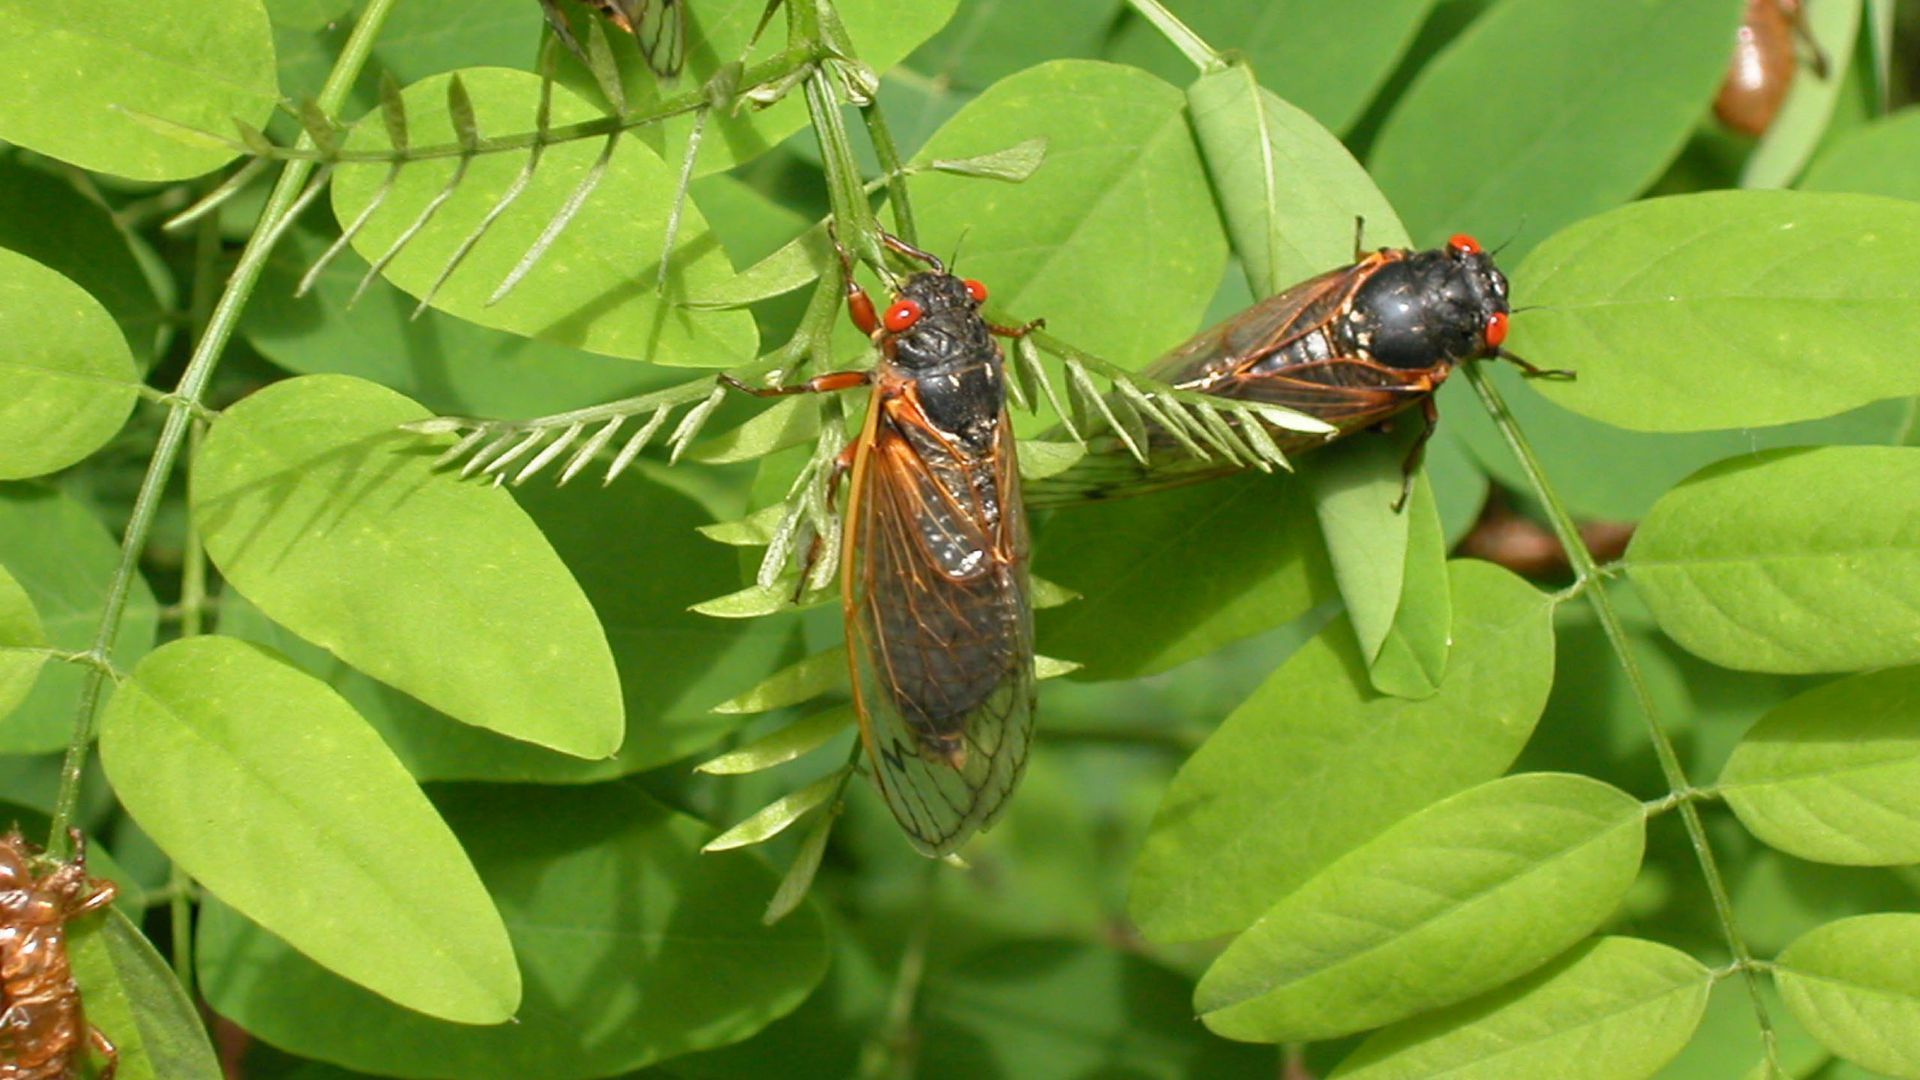 Cicadas on green leaves via Getty images